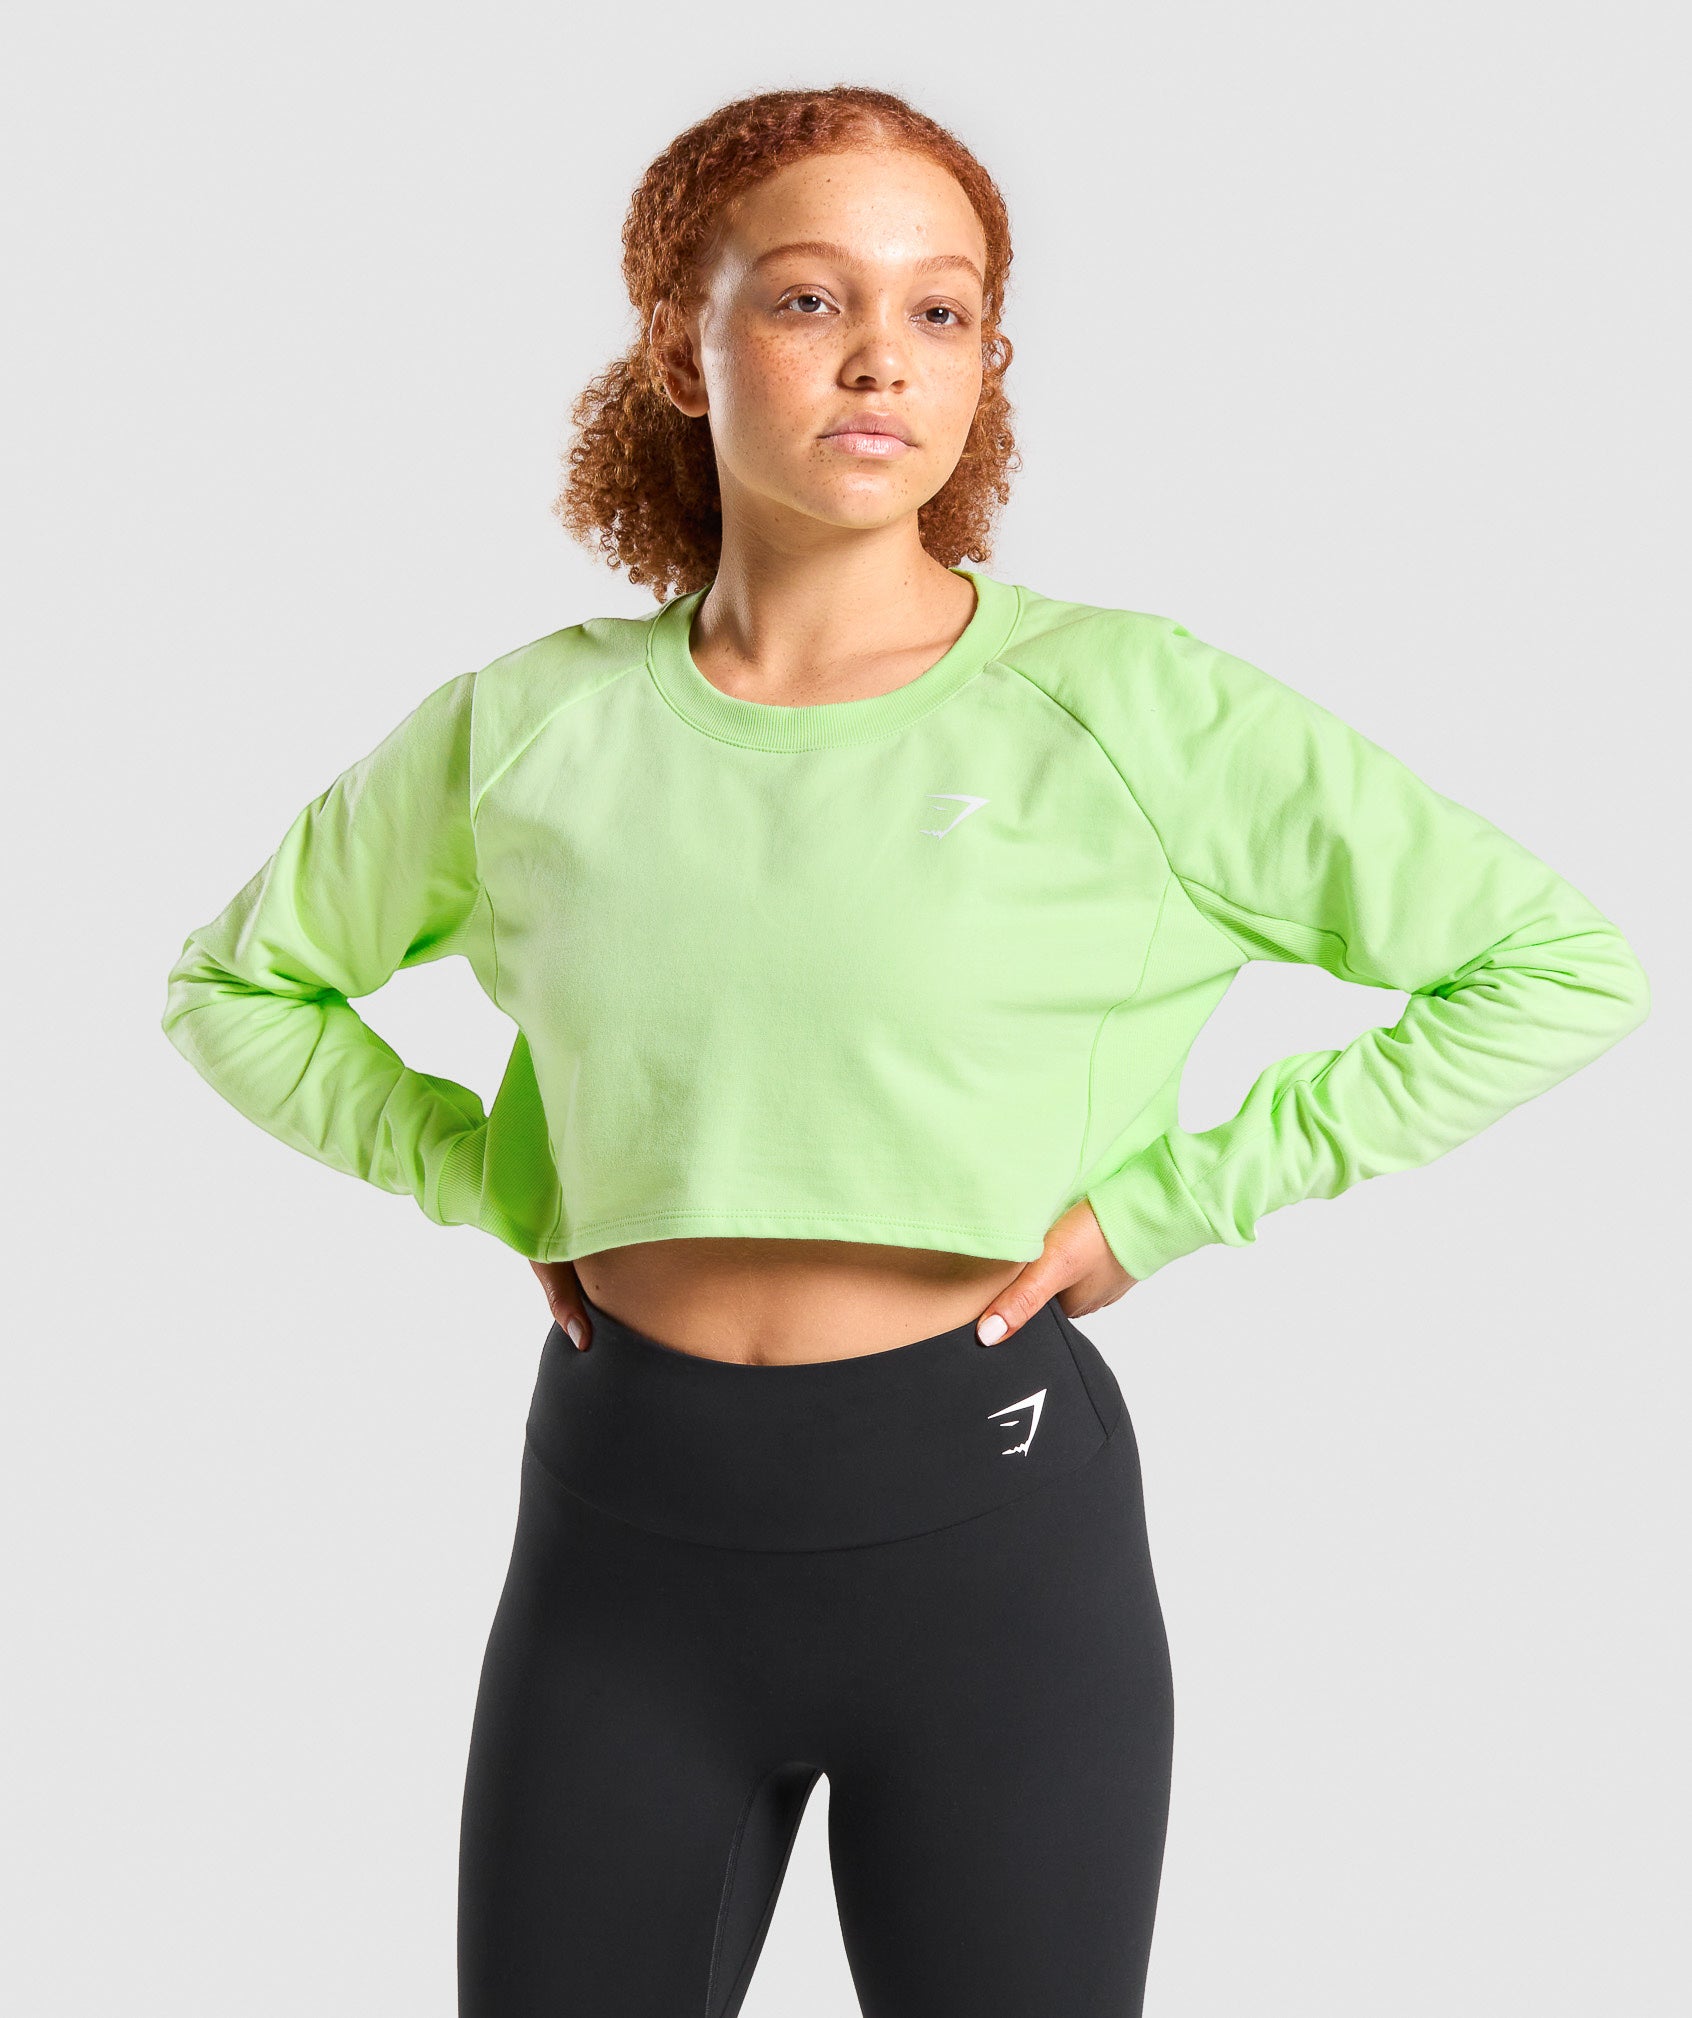 The Women's Basic Crop is one of those Gymshark must-have essentials.